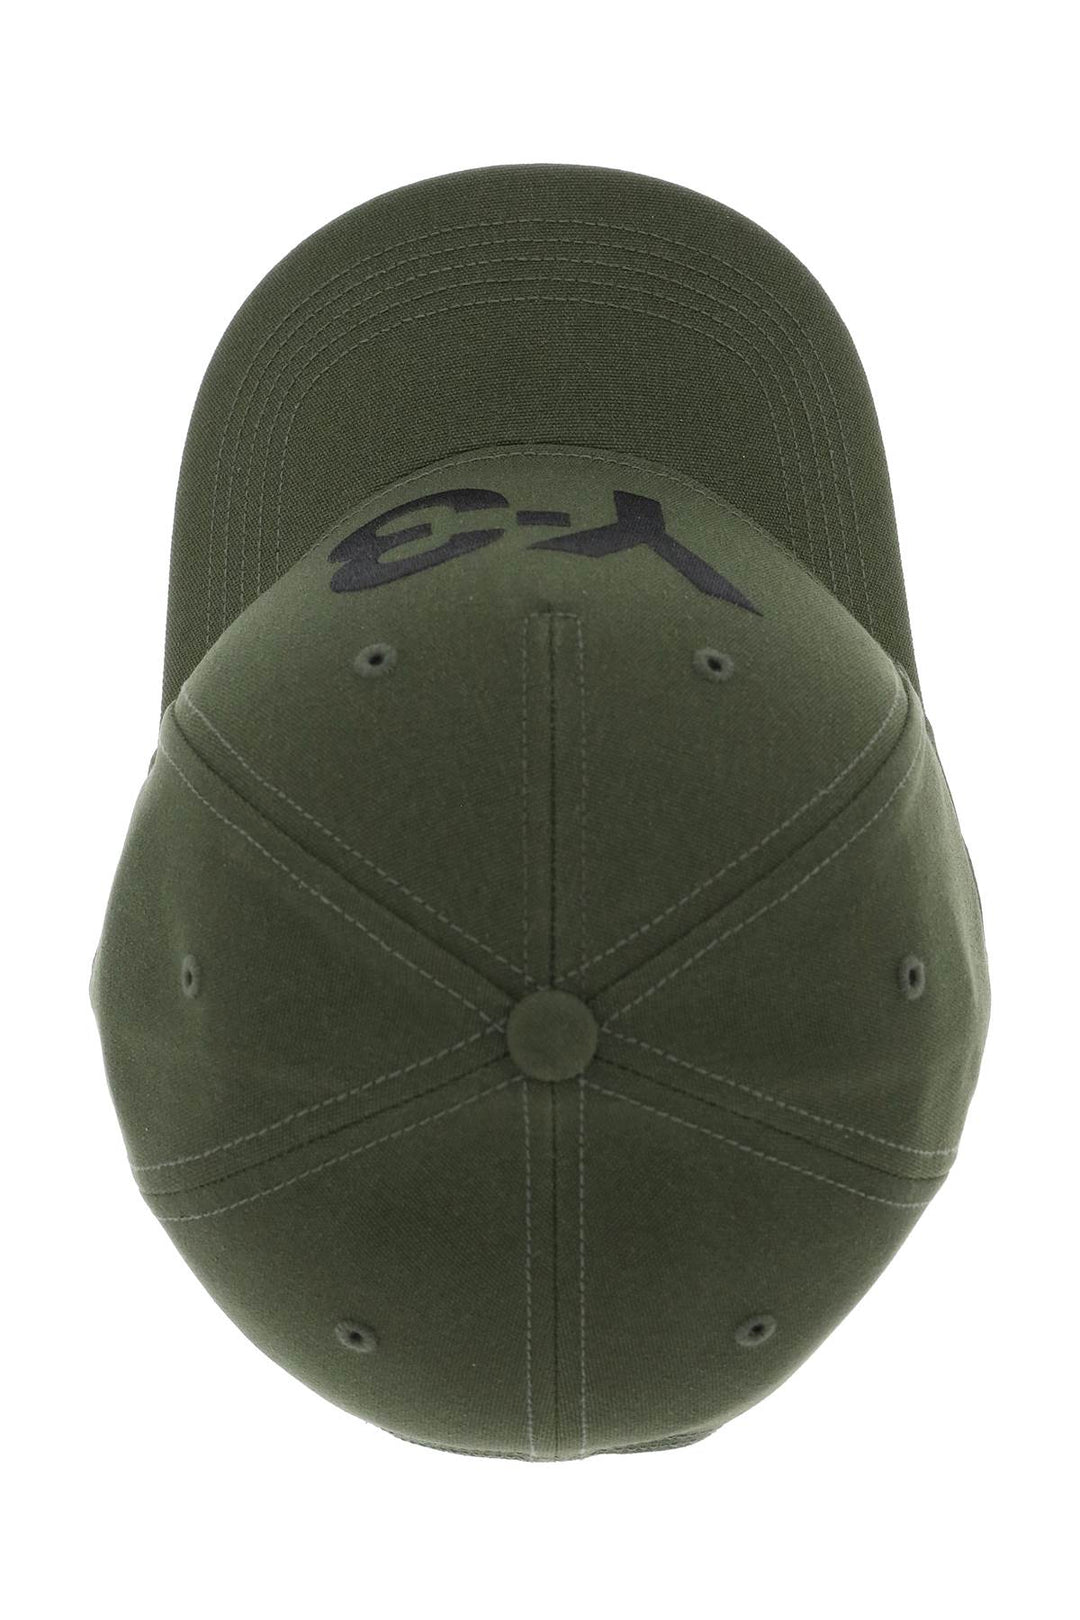 Y 3 Baseball Cap With Logo Embroidery   Verde